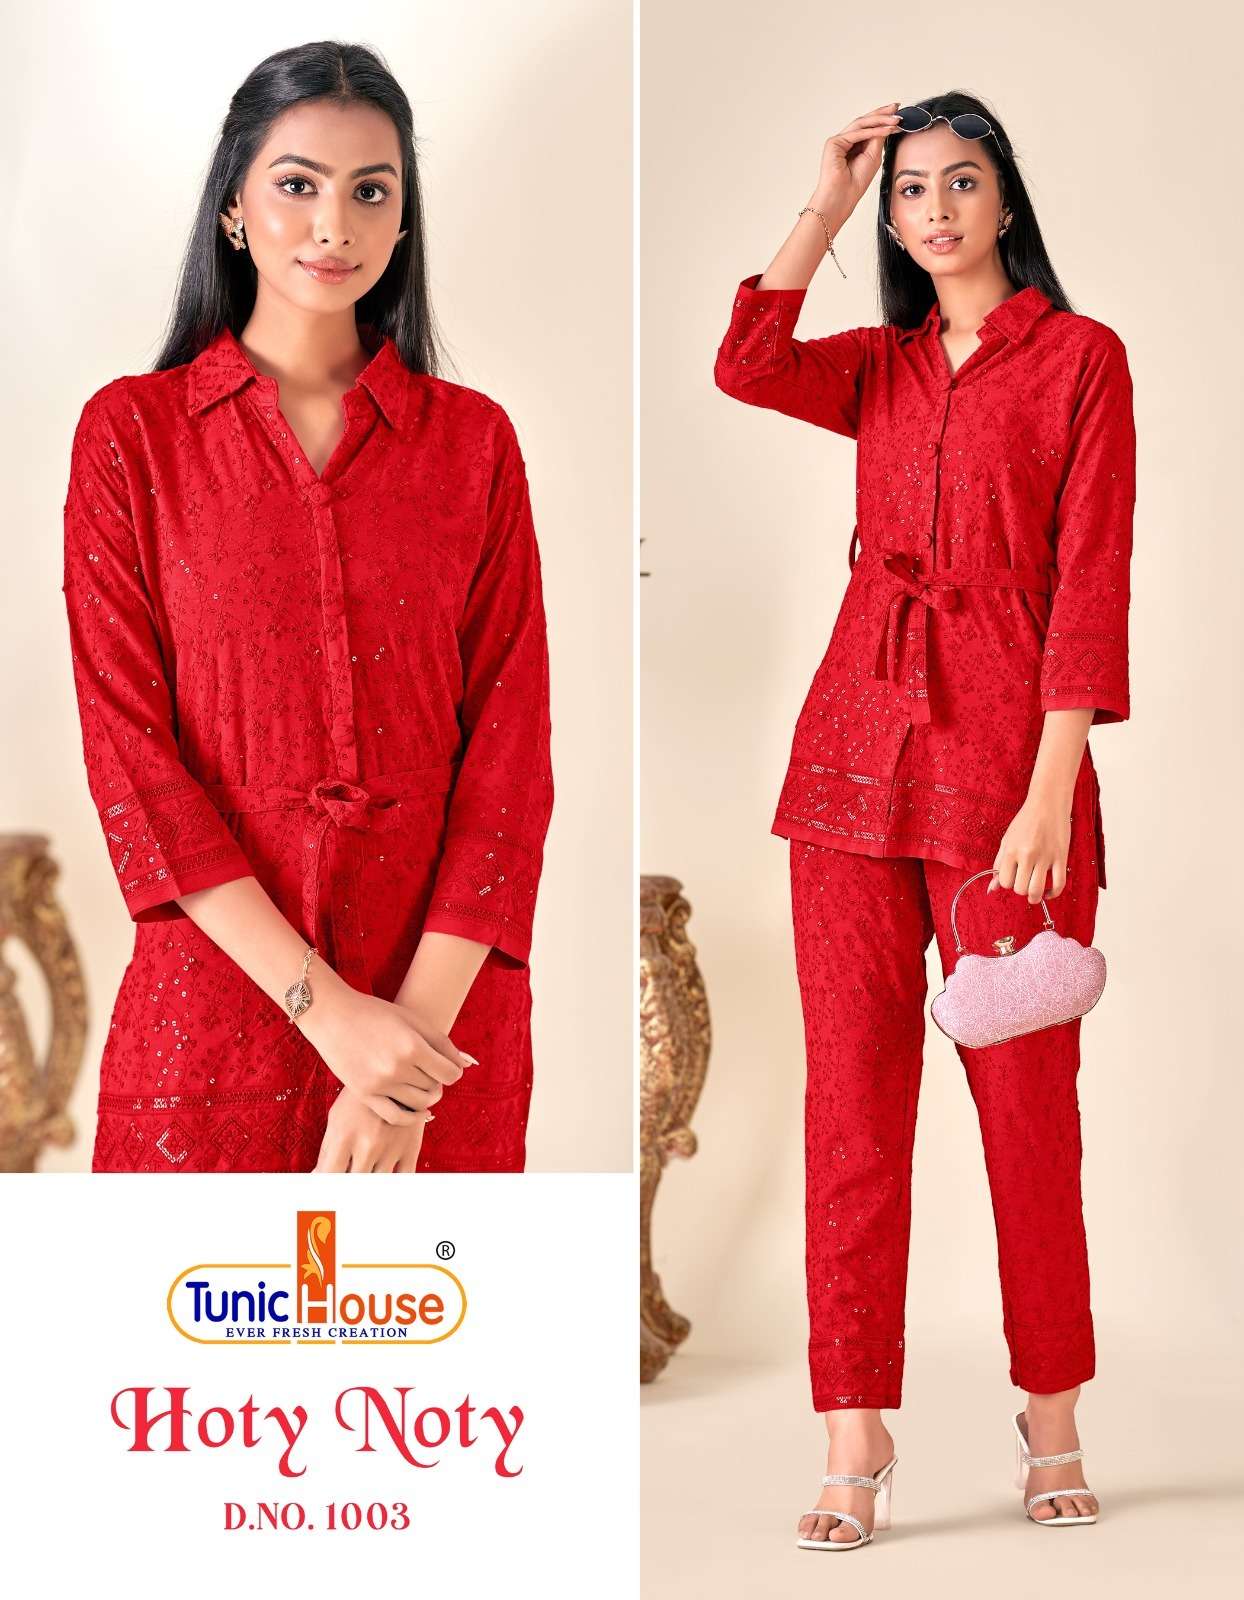 HOTY NOTY BY TUNIC HOUSE 1001 TO 1014 SERIES VISCOSE RAYON CO-ORD SET